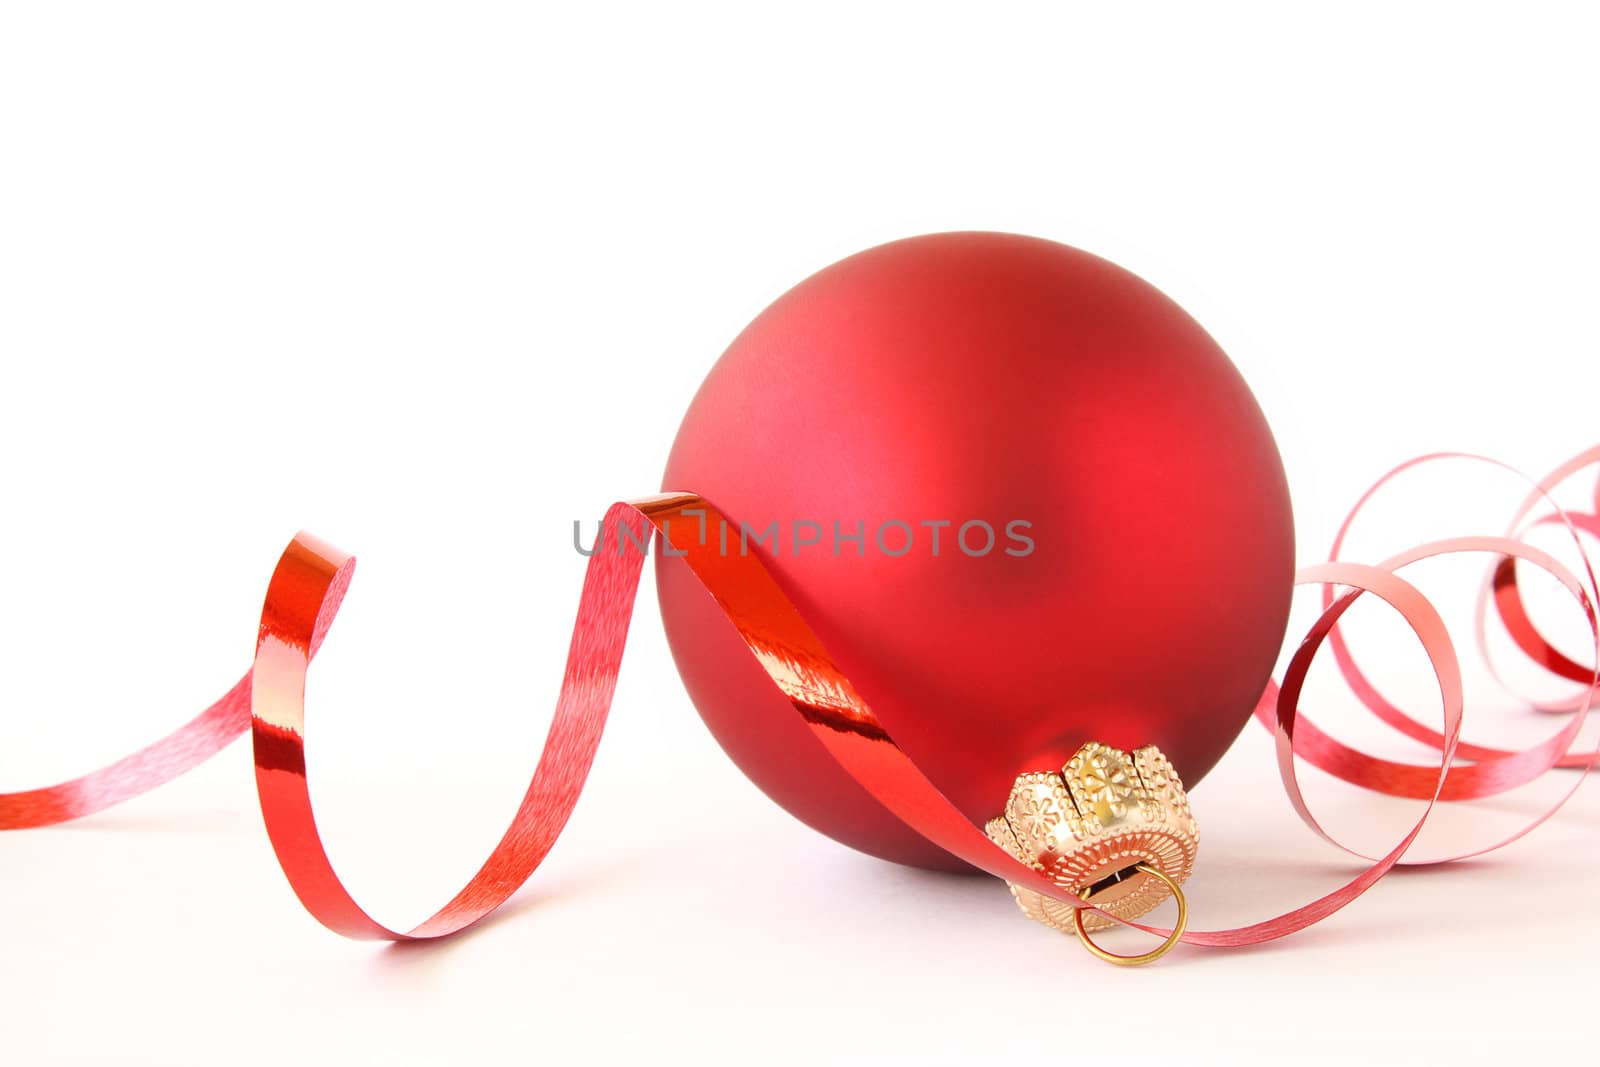 Red Christmas ball with a tape